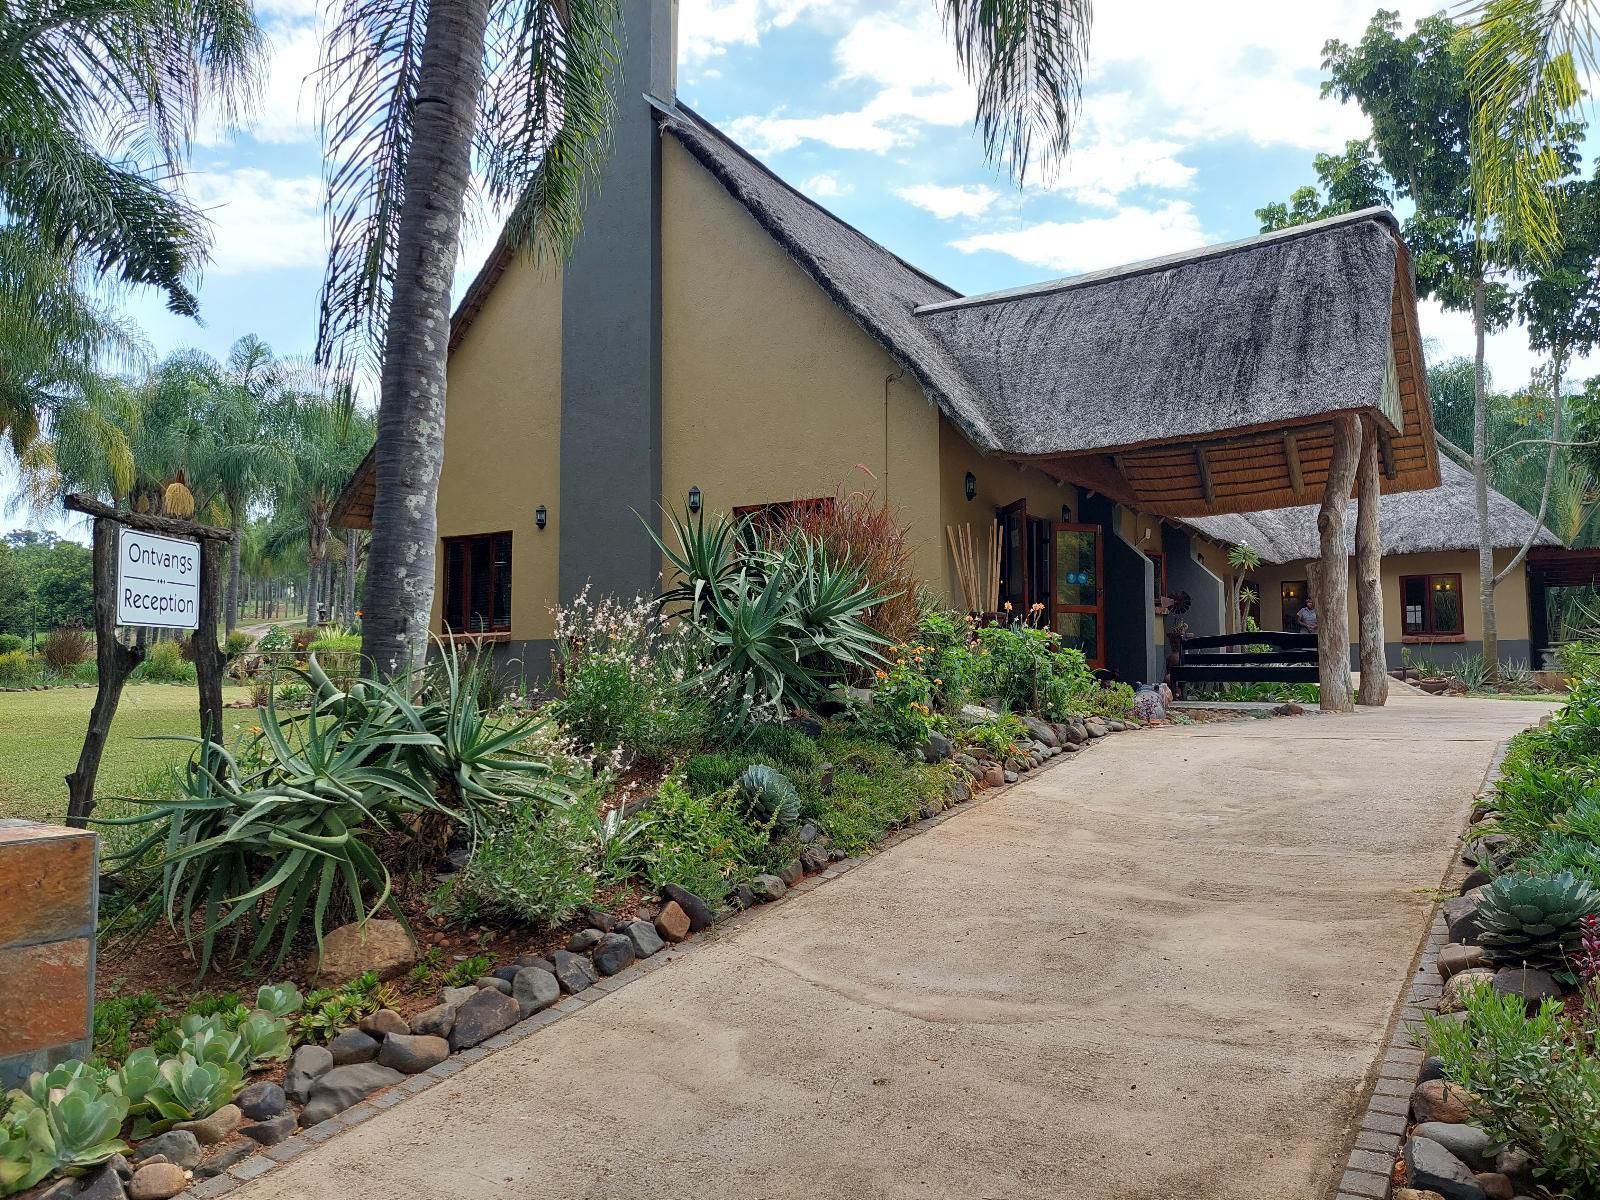 Aan De Vliet Holiday Resort Hazyview Mpumalanga South Africa House, Building, Architecture, Palm Tree, Plant, Nature, Wood